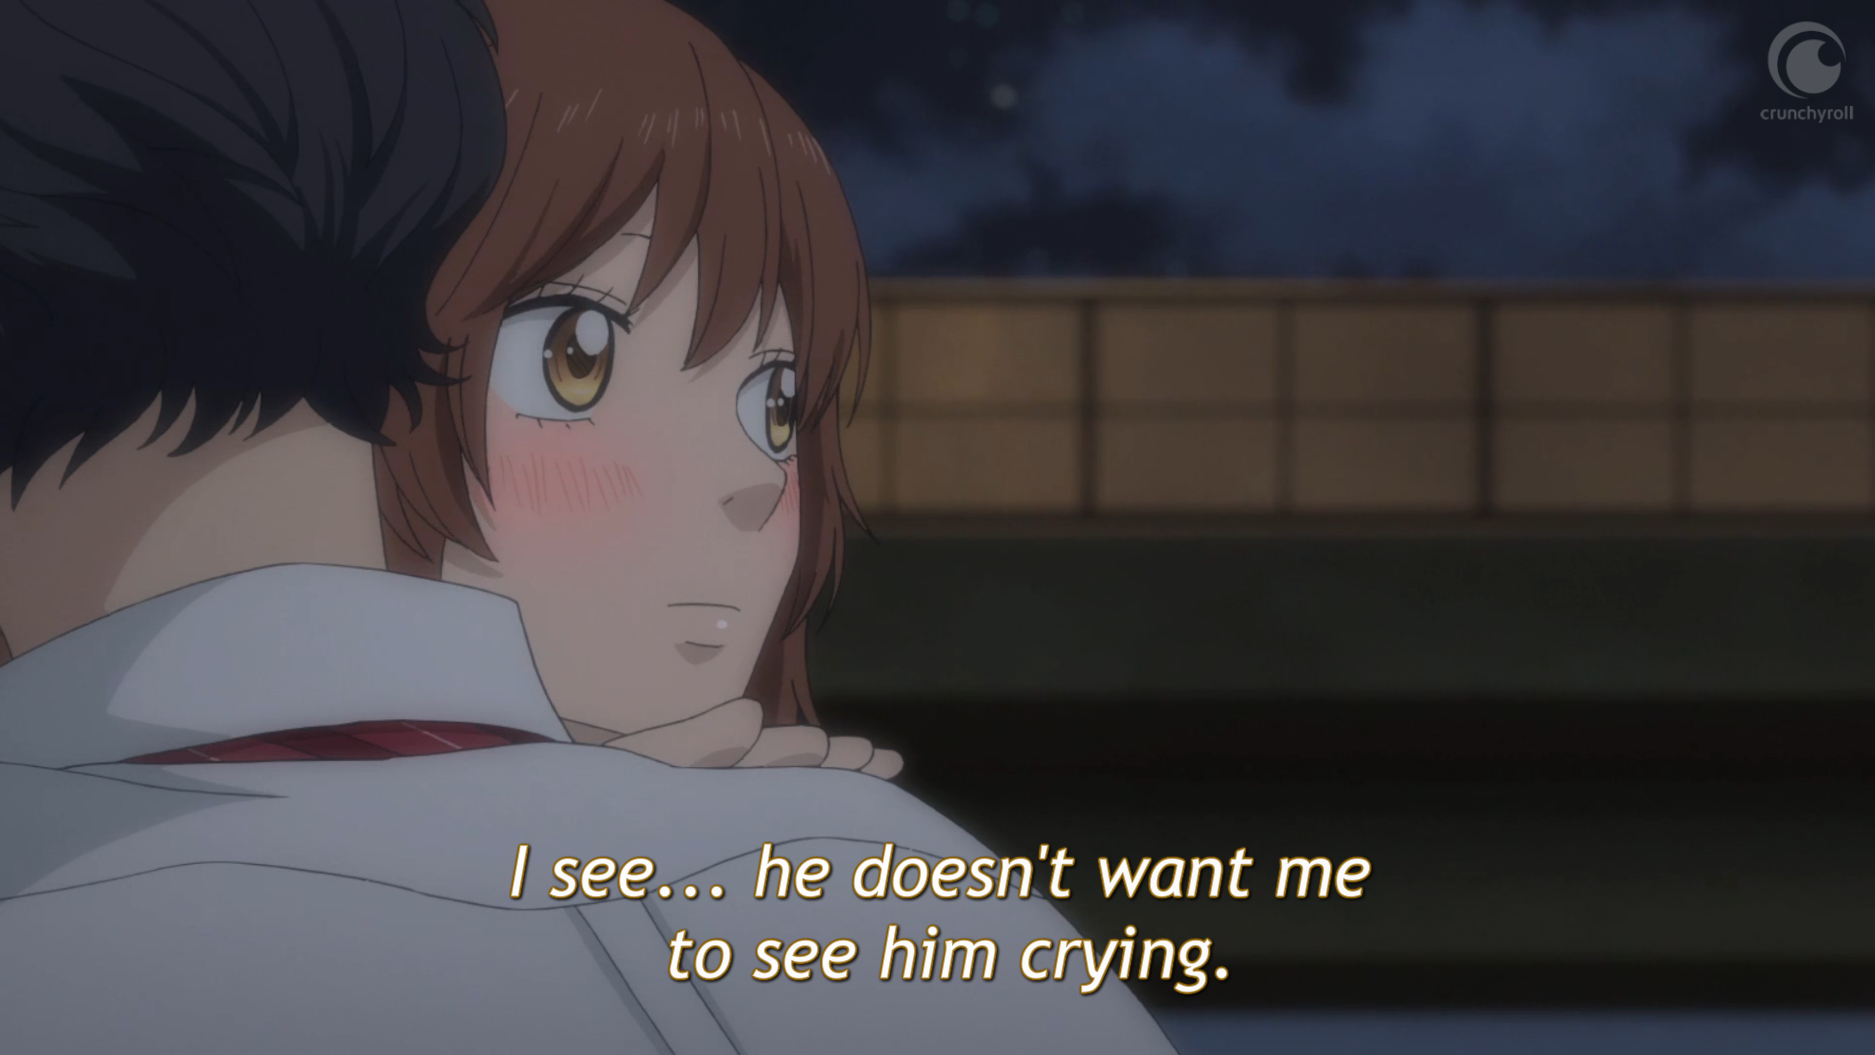 Blue Spring Ride is THE BEST Shoujo Anime